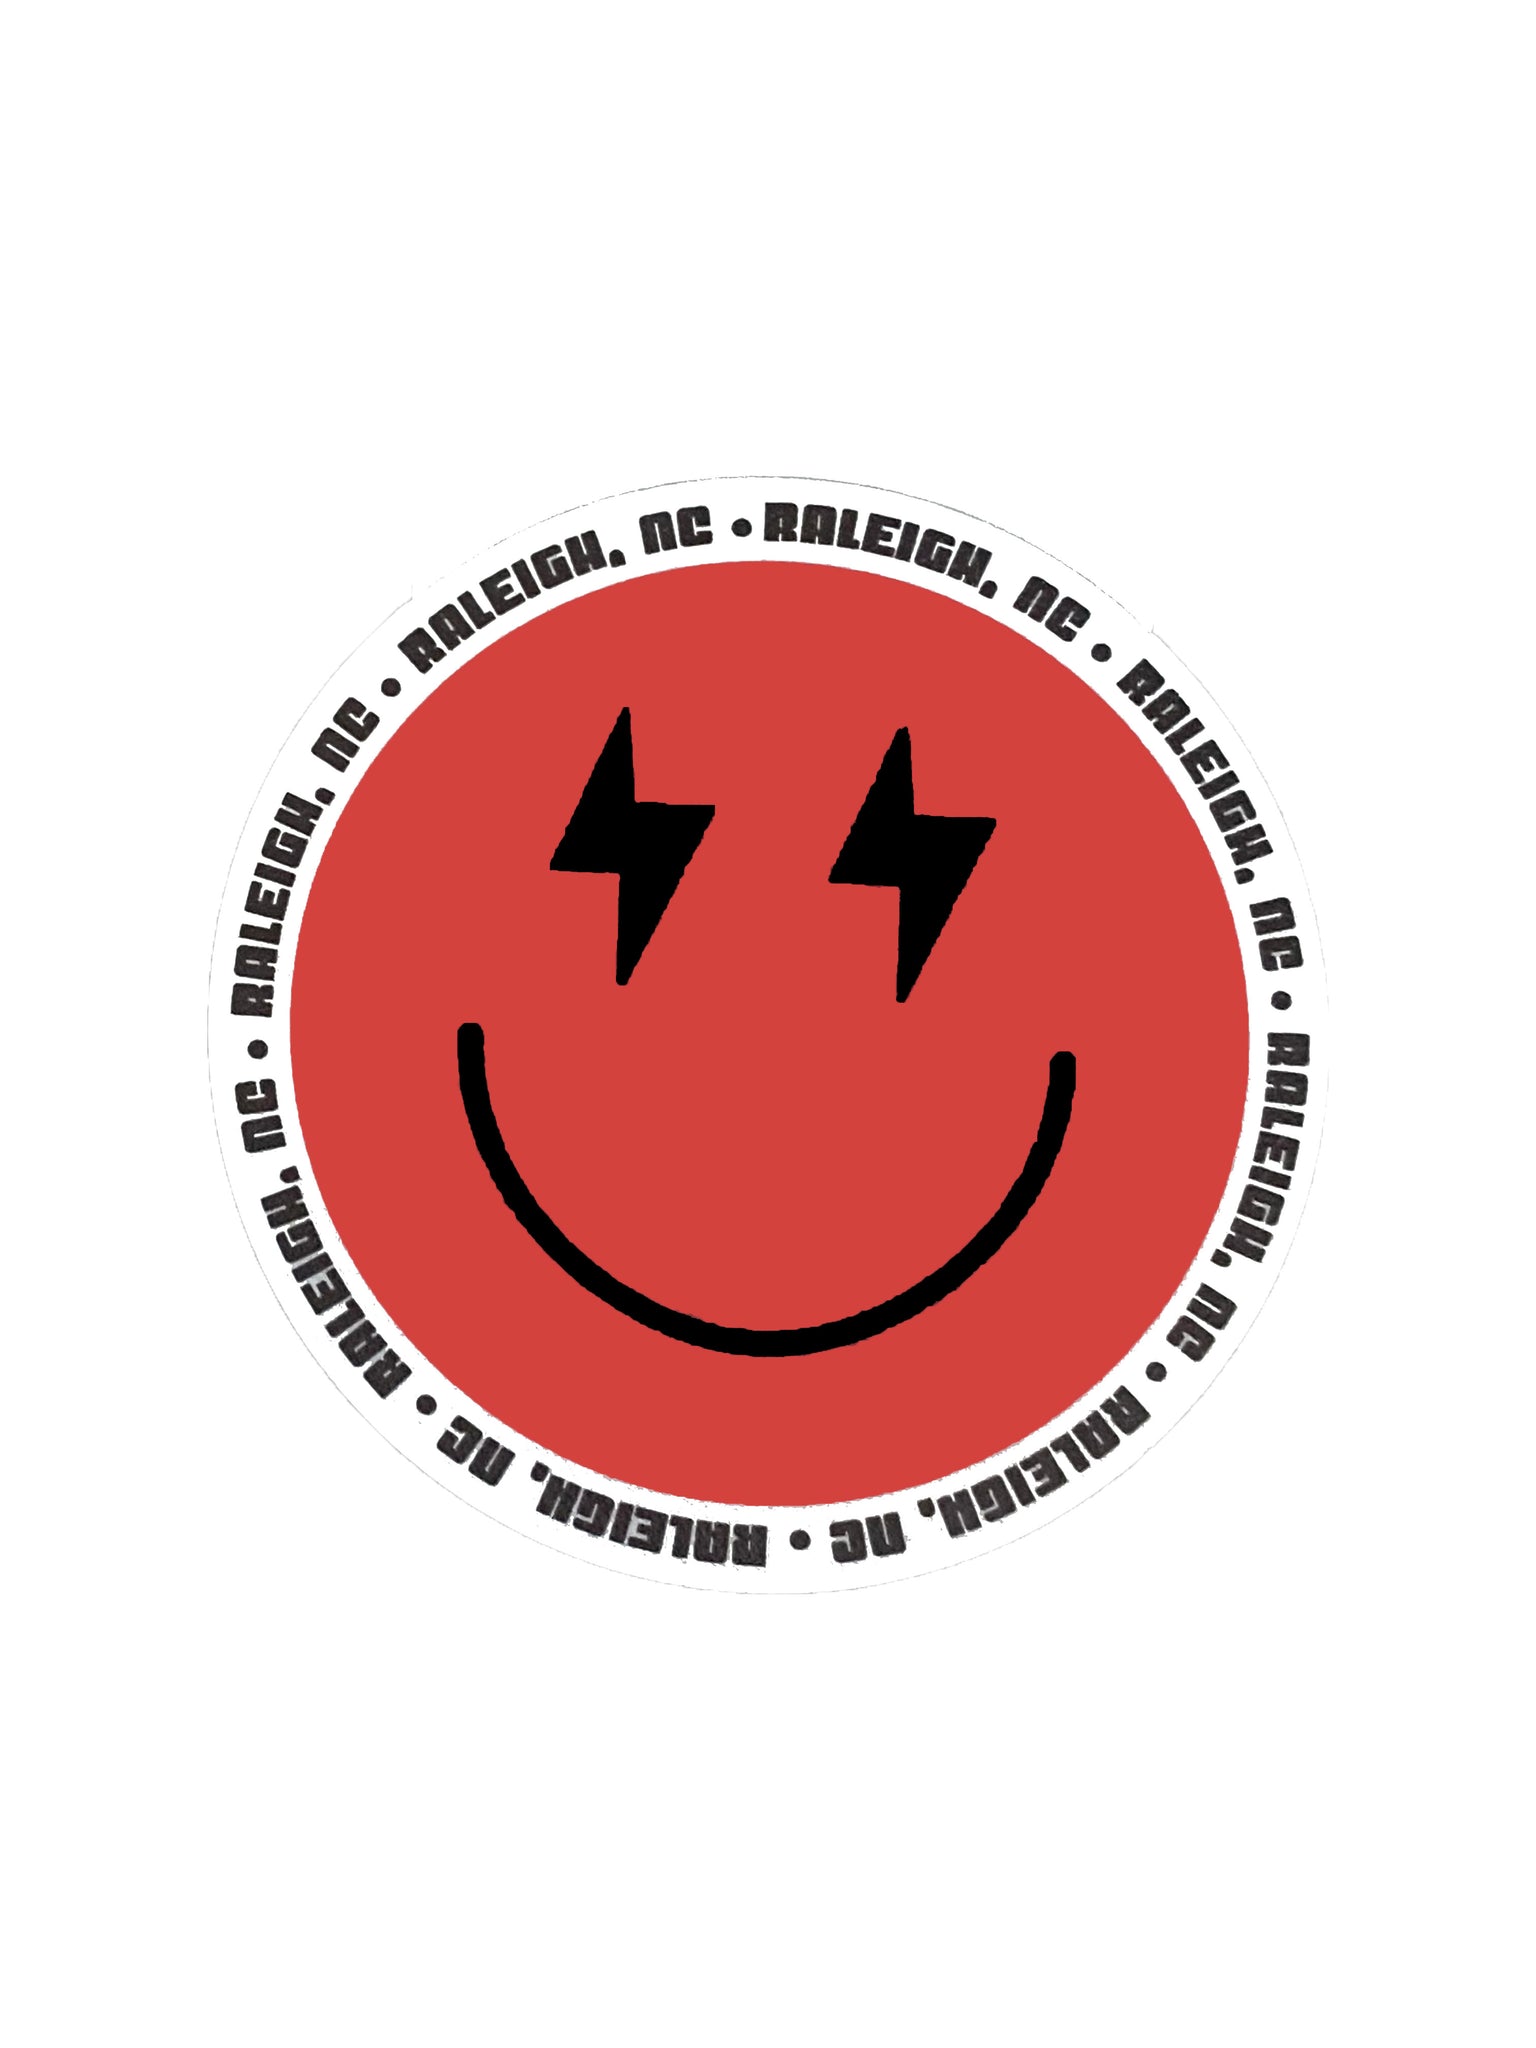 3.5" Raleigh Lightning Smiley Face Rugged Sticker